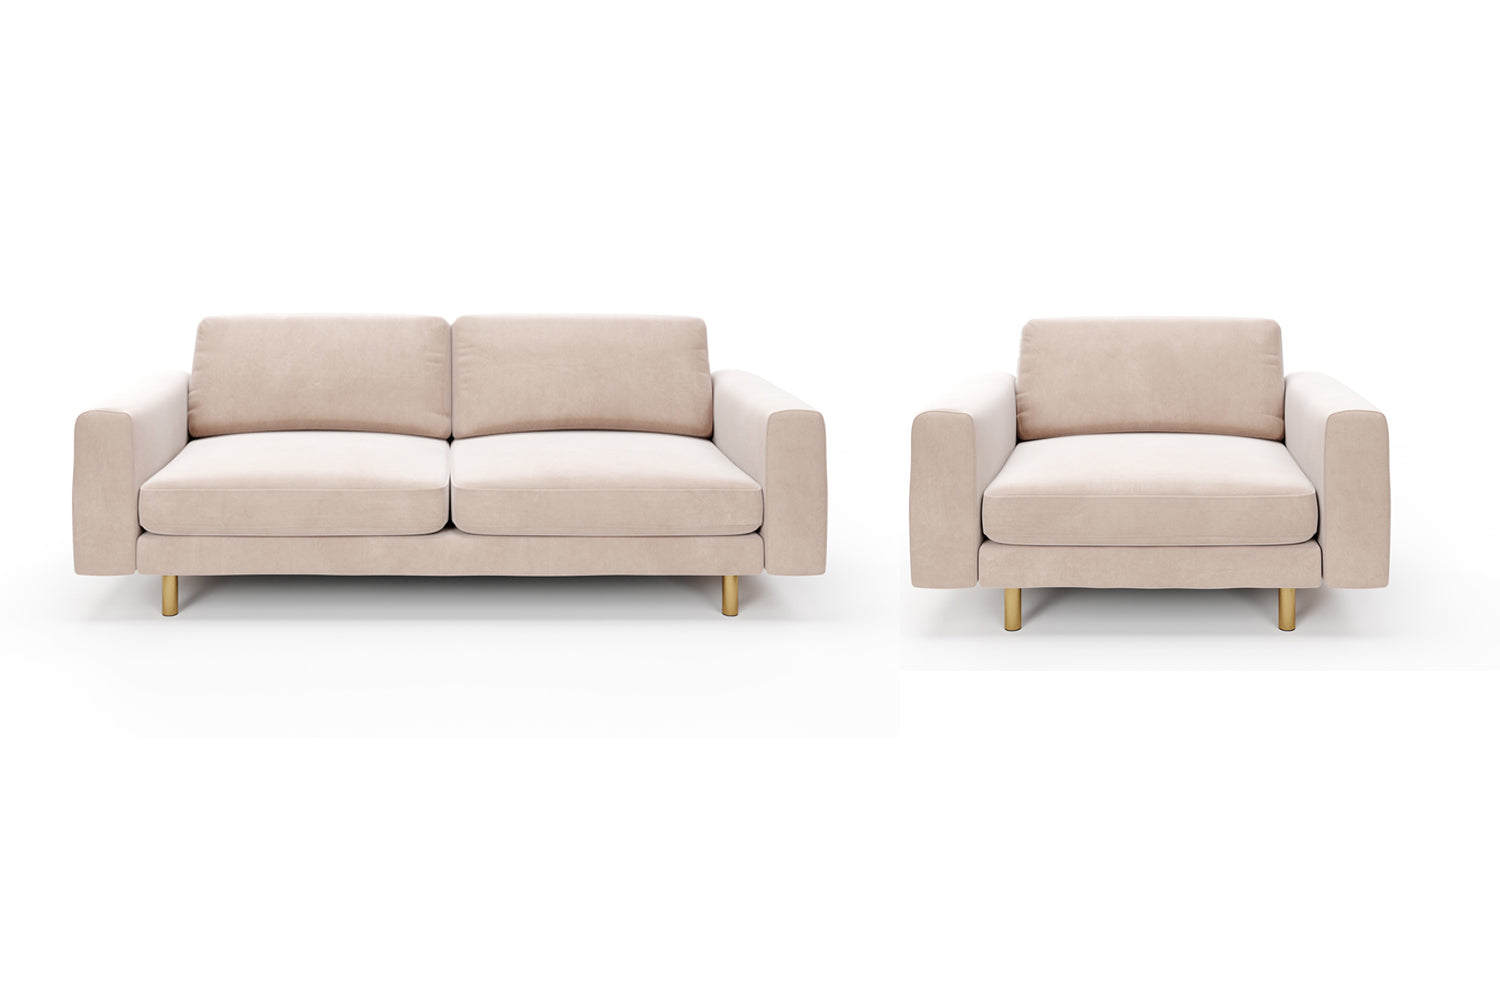 The Big Chill - 3 Seater Sofa and 1.5 Seater Snuggler Set - Taupe